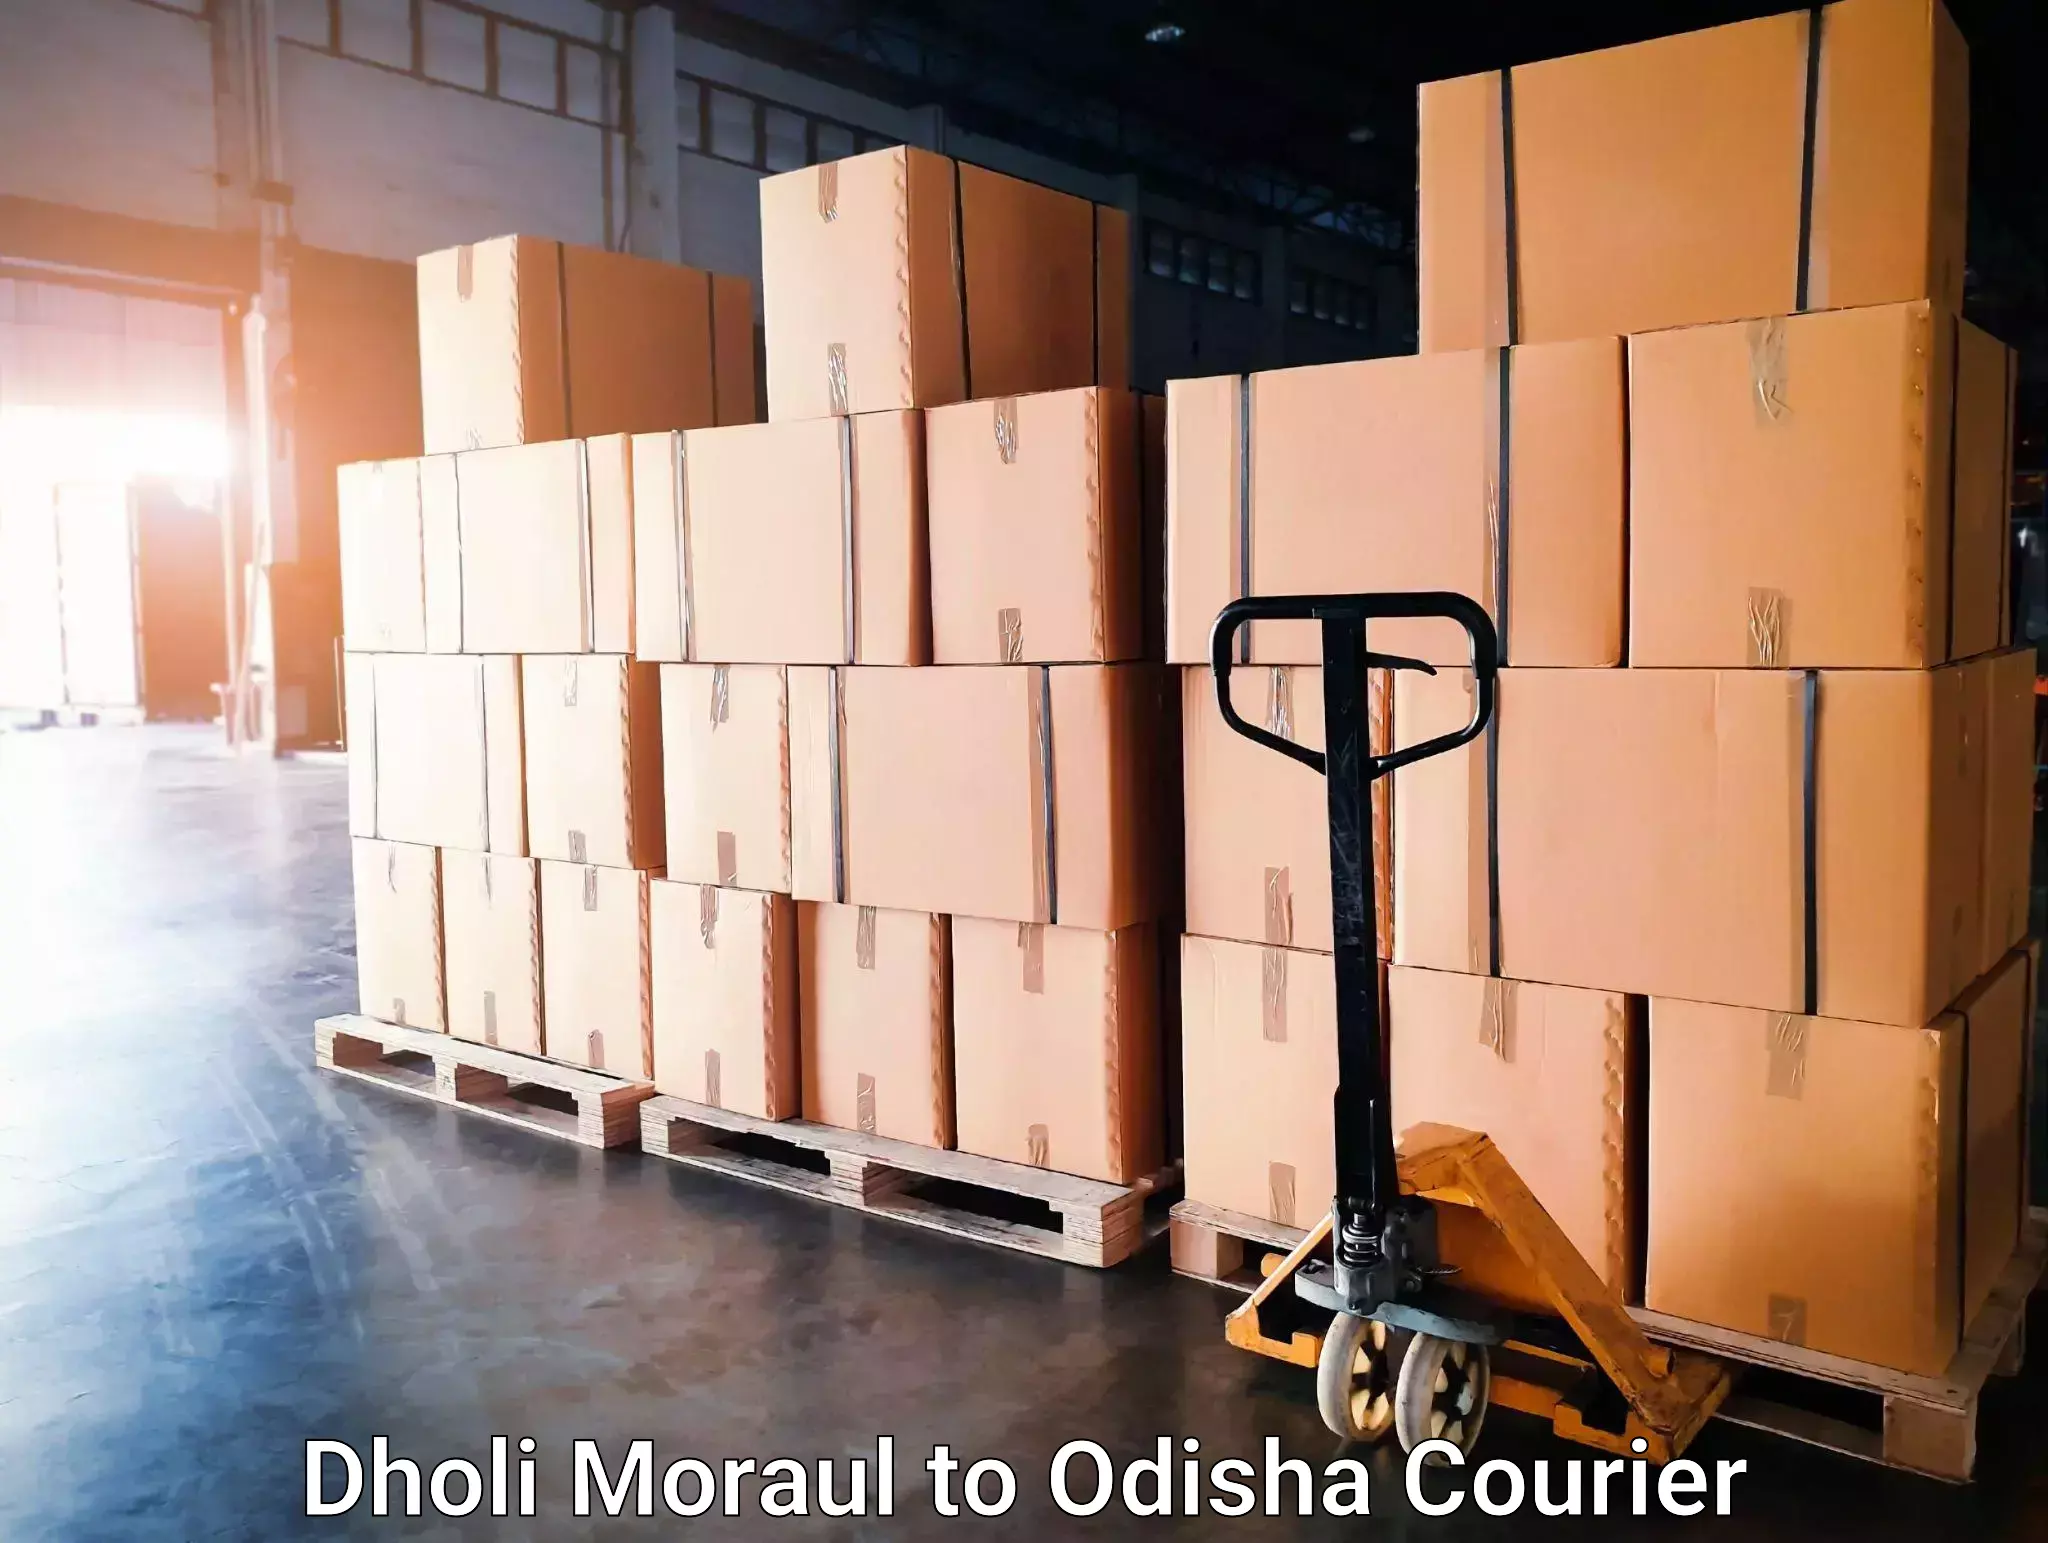 Hassle-free relocation Dholi Moraul to Chandipur